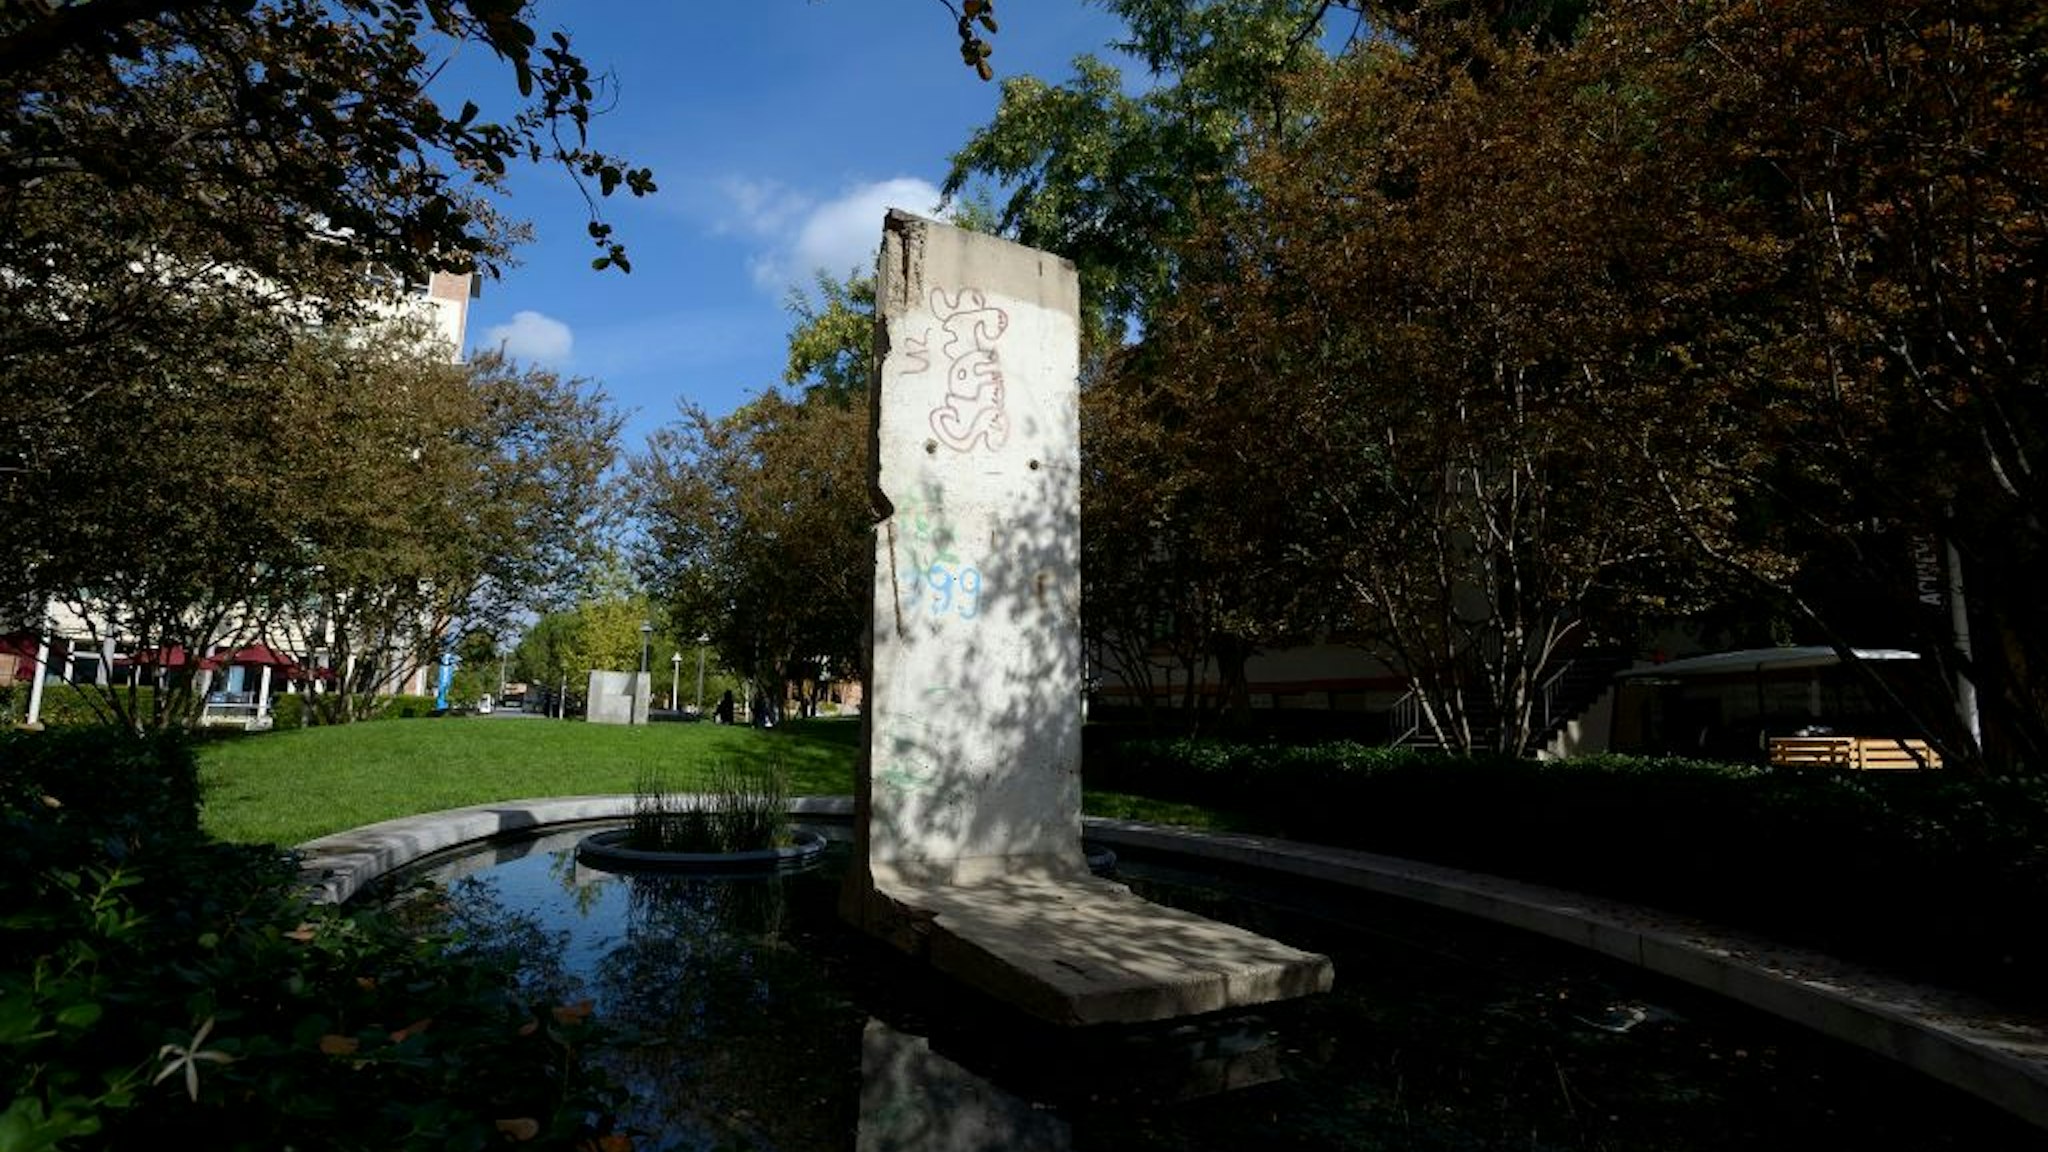 ORANGE, CA - NOVEMBER 13: A section of the Berlin Wall in Liberty Plaza at Chapman University on Thursday. The wall was acquired in 1999, thanks to a two-year effort by Chapman University President Jim Doti.